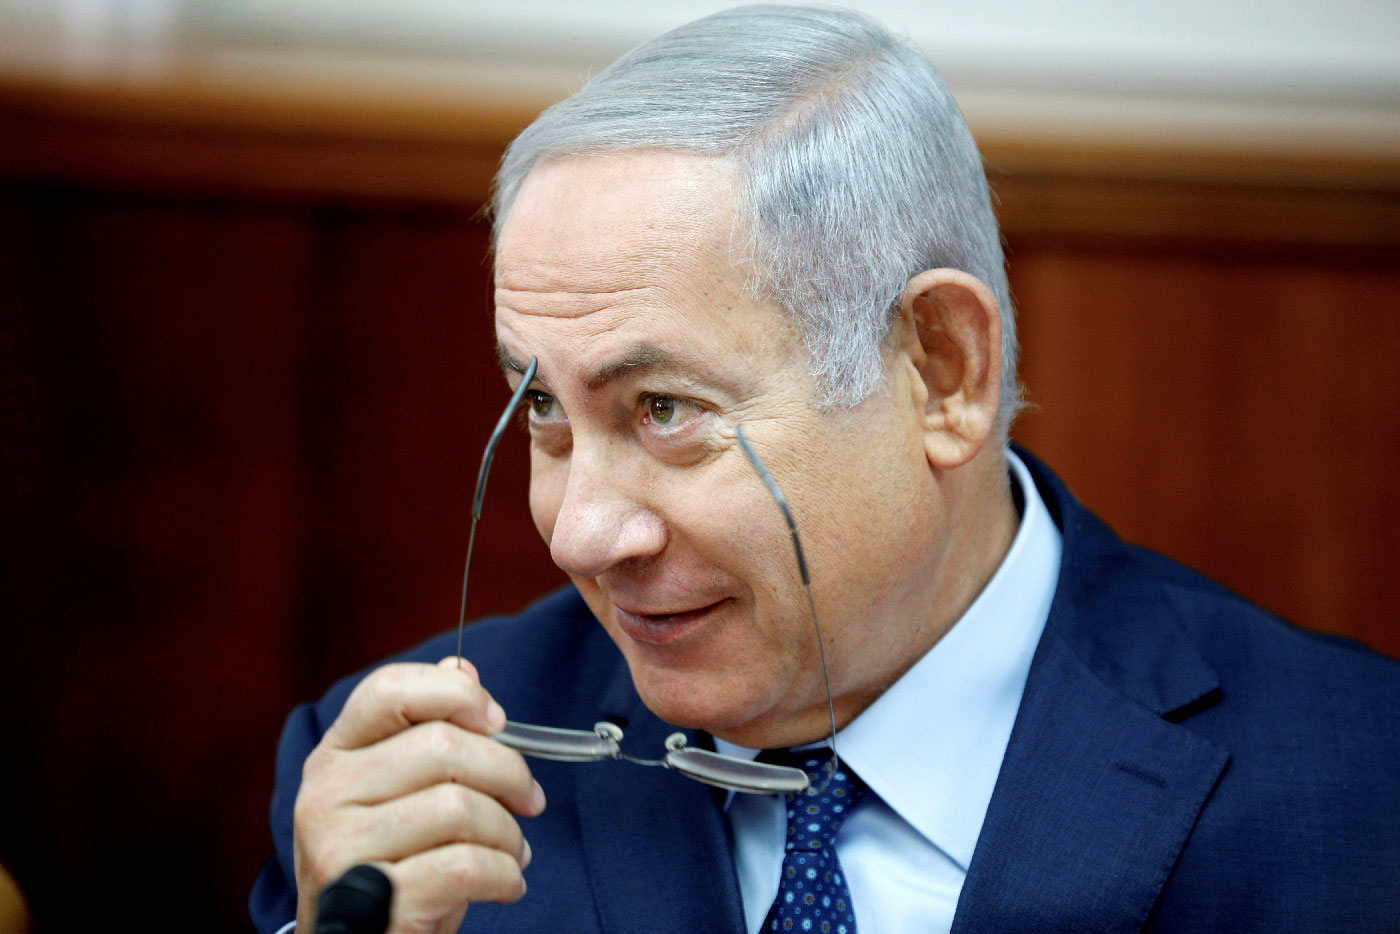 Israeli Prime Minister Benjamin Netanyahu attends the weekly cabinet meeting at his office in Jerusalem October 14, 2018.